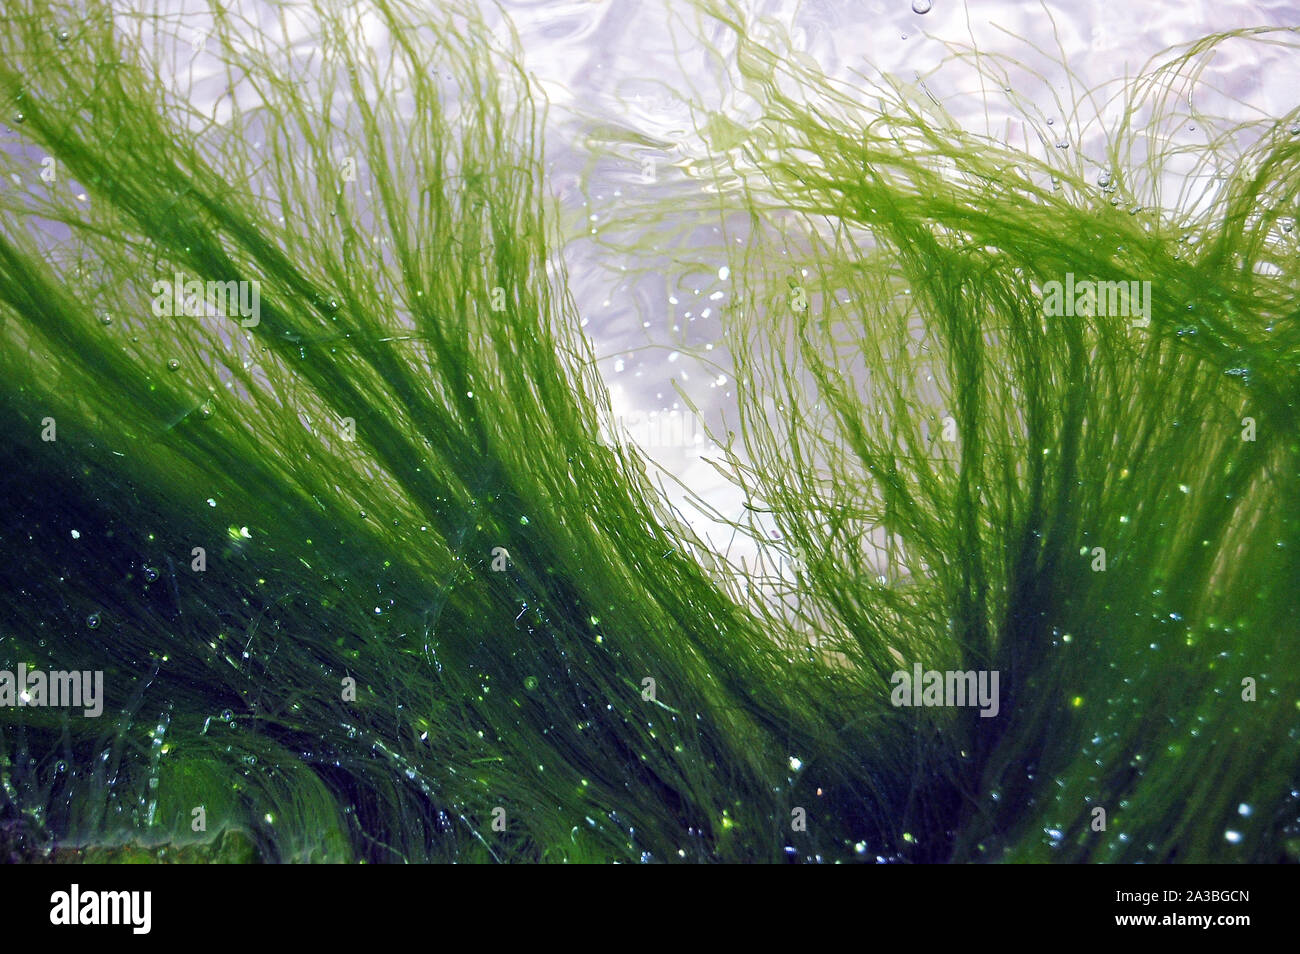 Background of seaweed floating in water Stock Photo